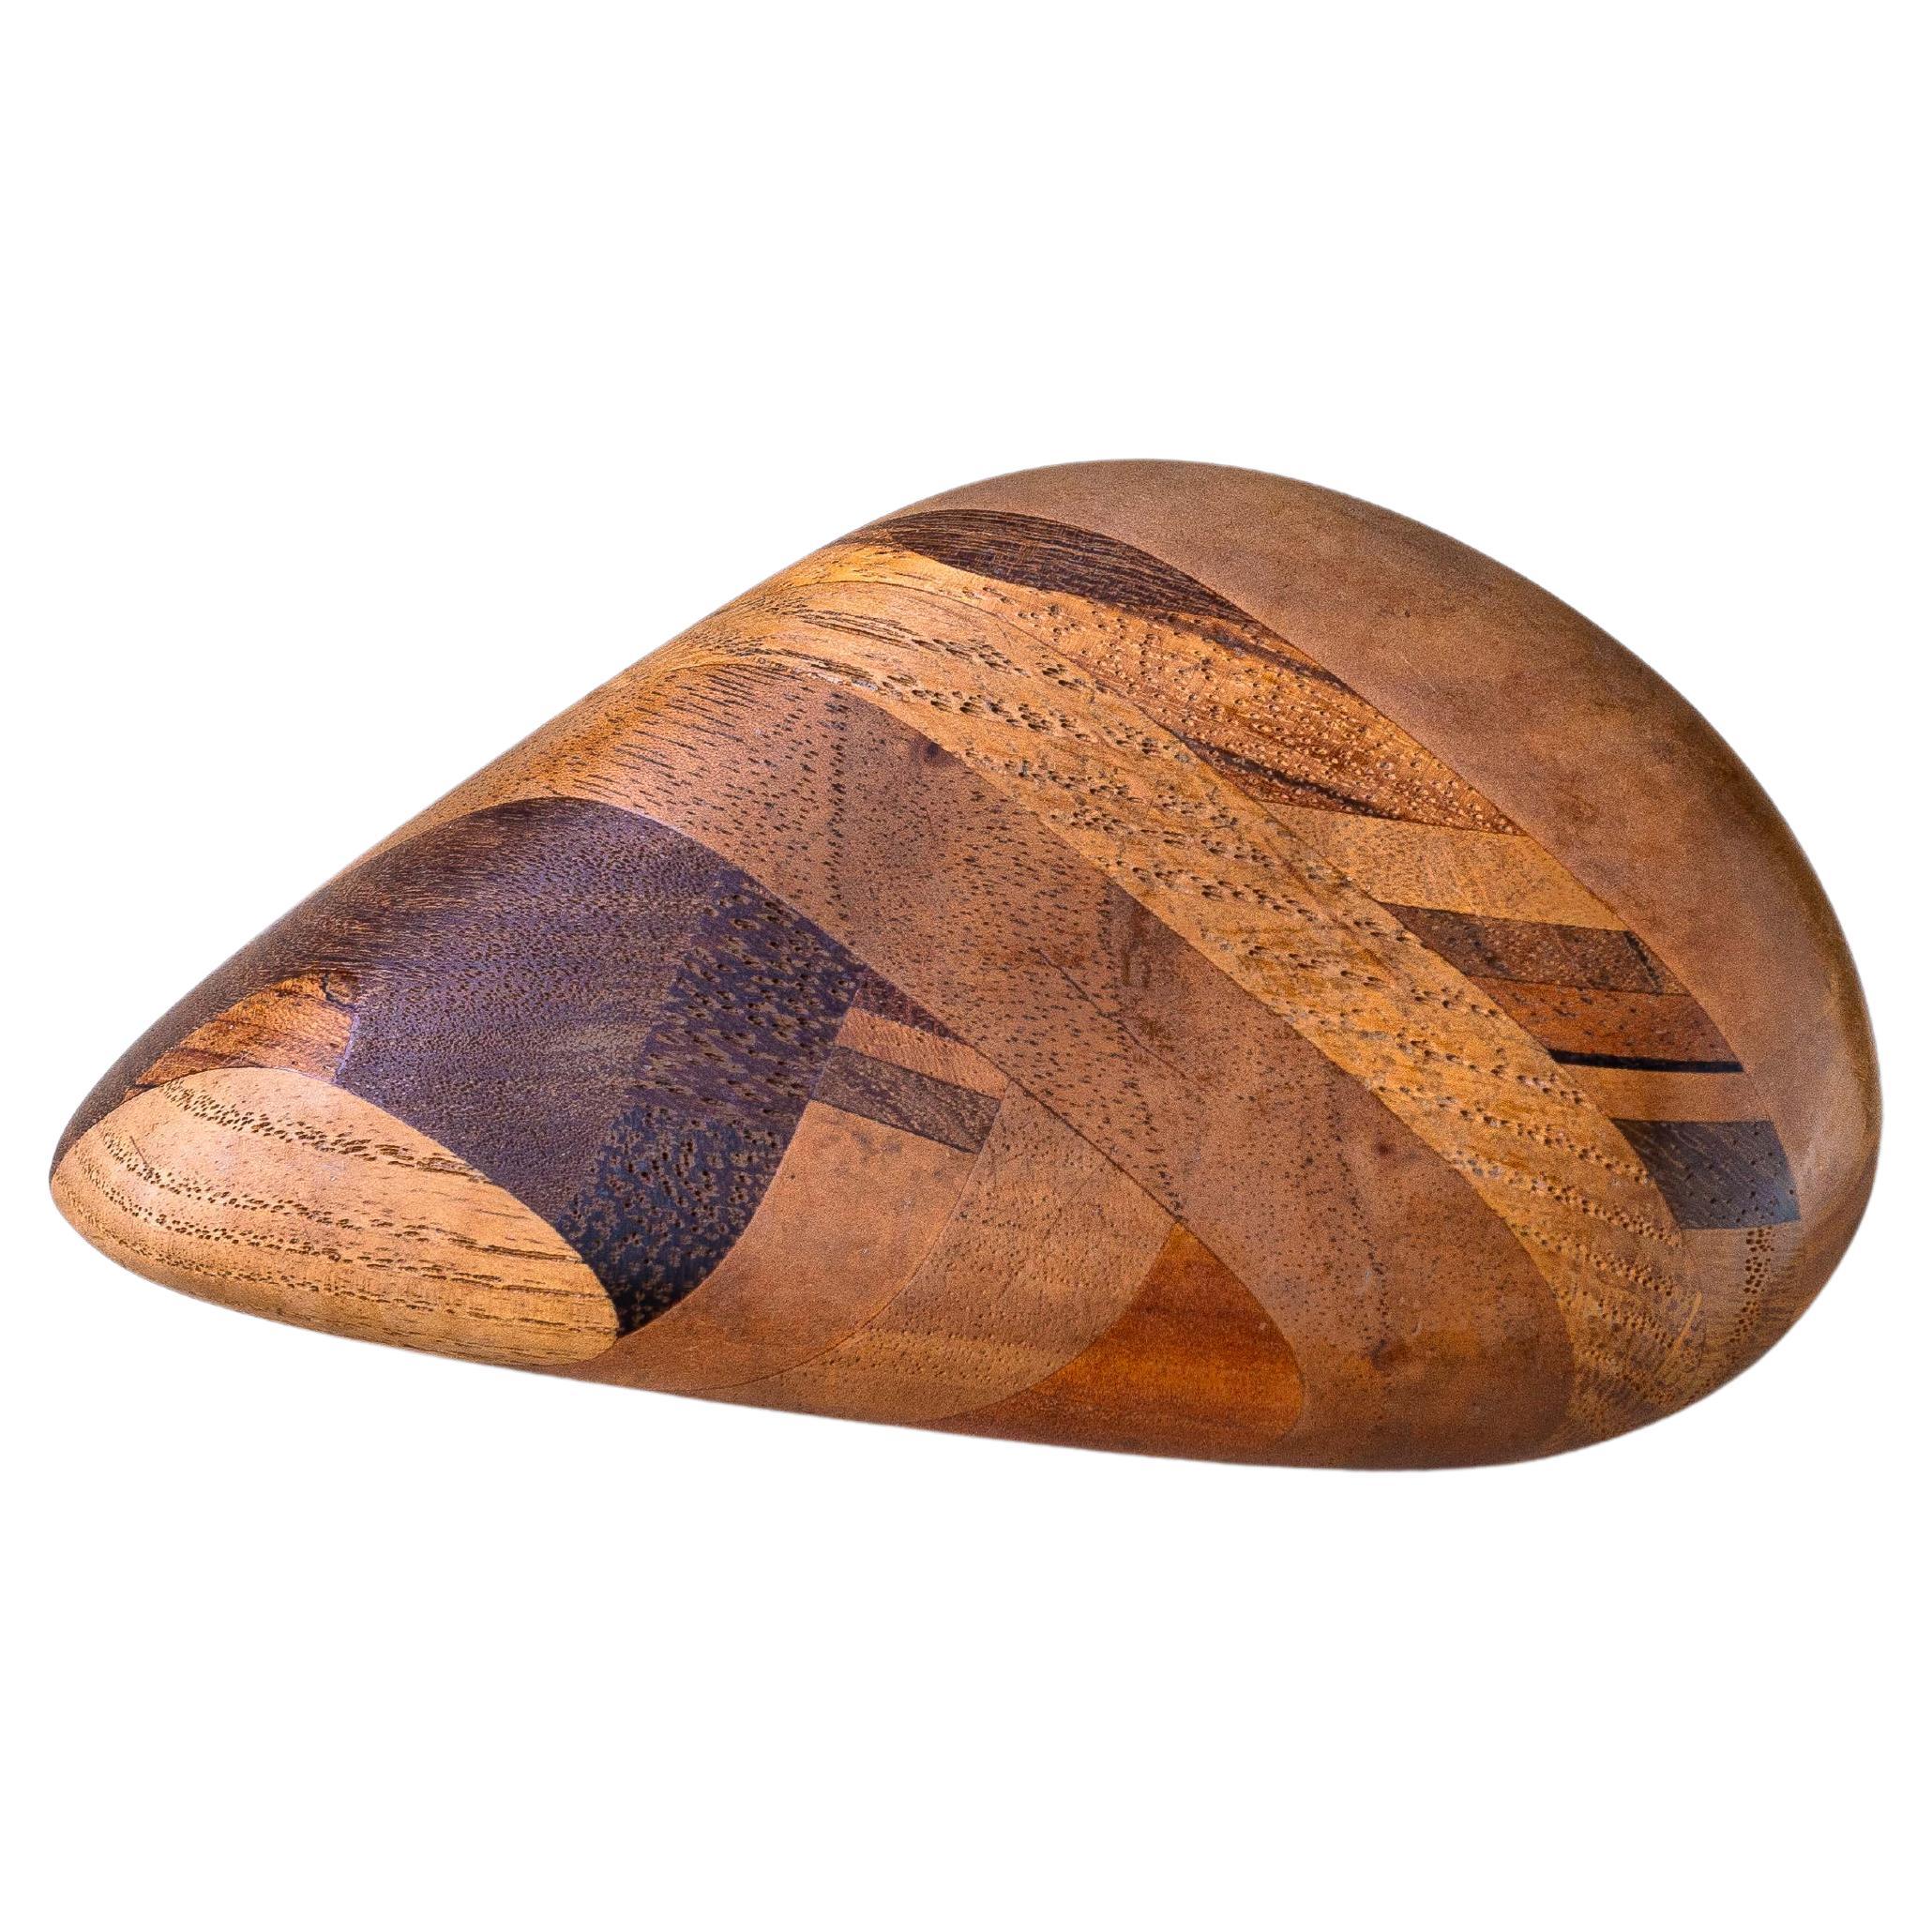 Sculpture Wooden Pebble, 1970s Desk Accessory, Marquetry Paperweight For Sale